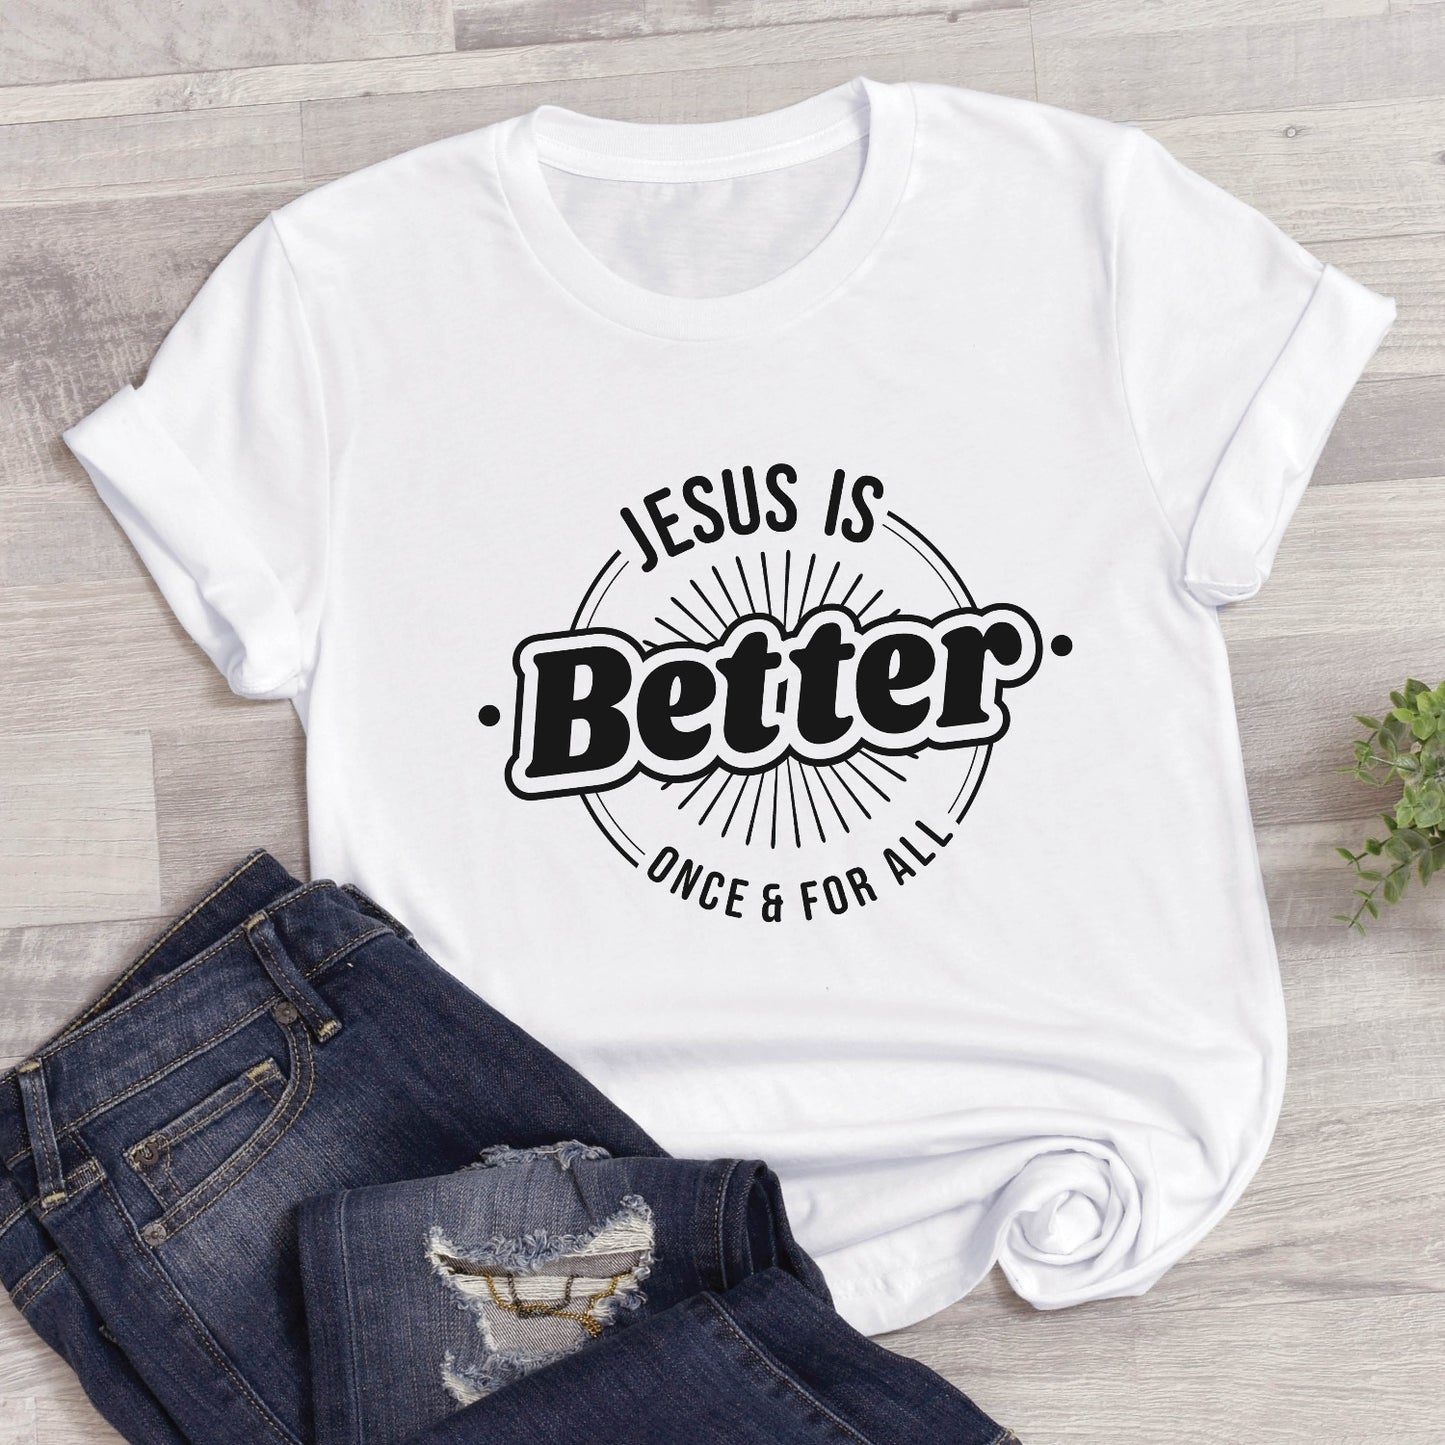 White "Jesus Is Better - Once & For All" bible book of Hebrews faith-based Christian unisex t-shirt for women with a bold black and white sunburst logo style design